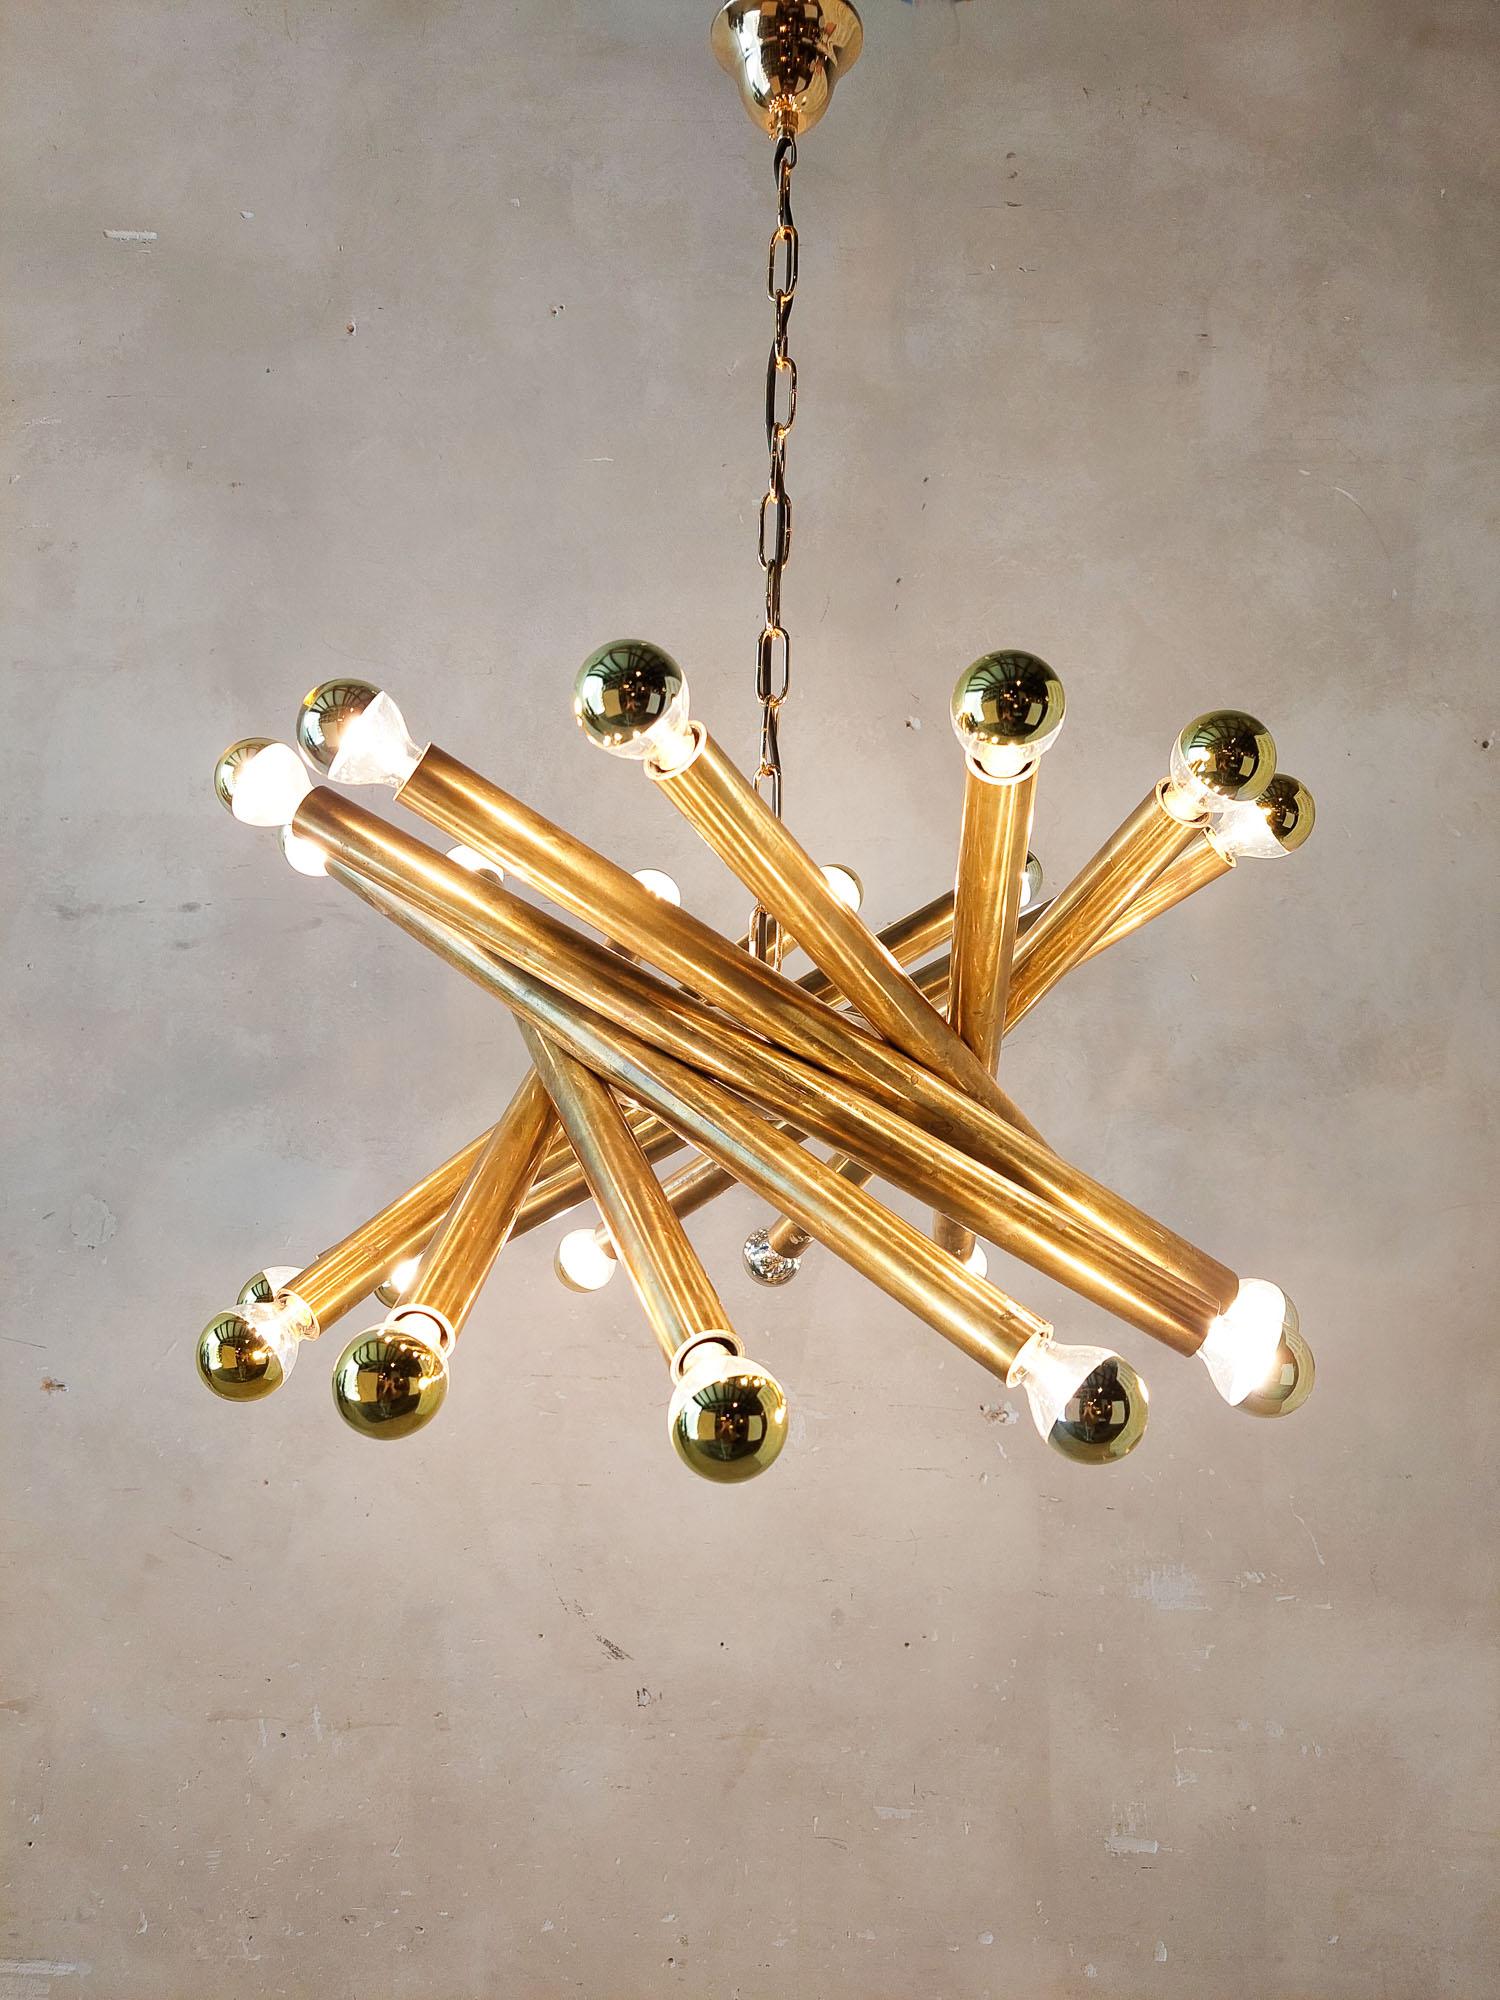 Pair of Midcentury Italian Brass Pendant Lamps by Stilnovo from the 1950s For Sale 4